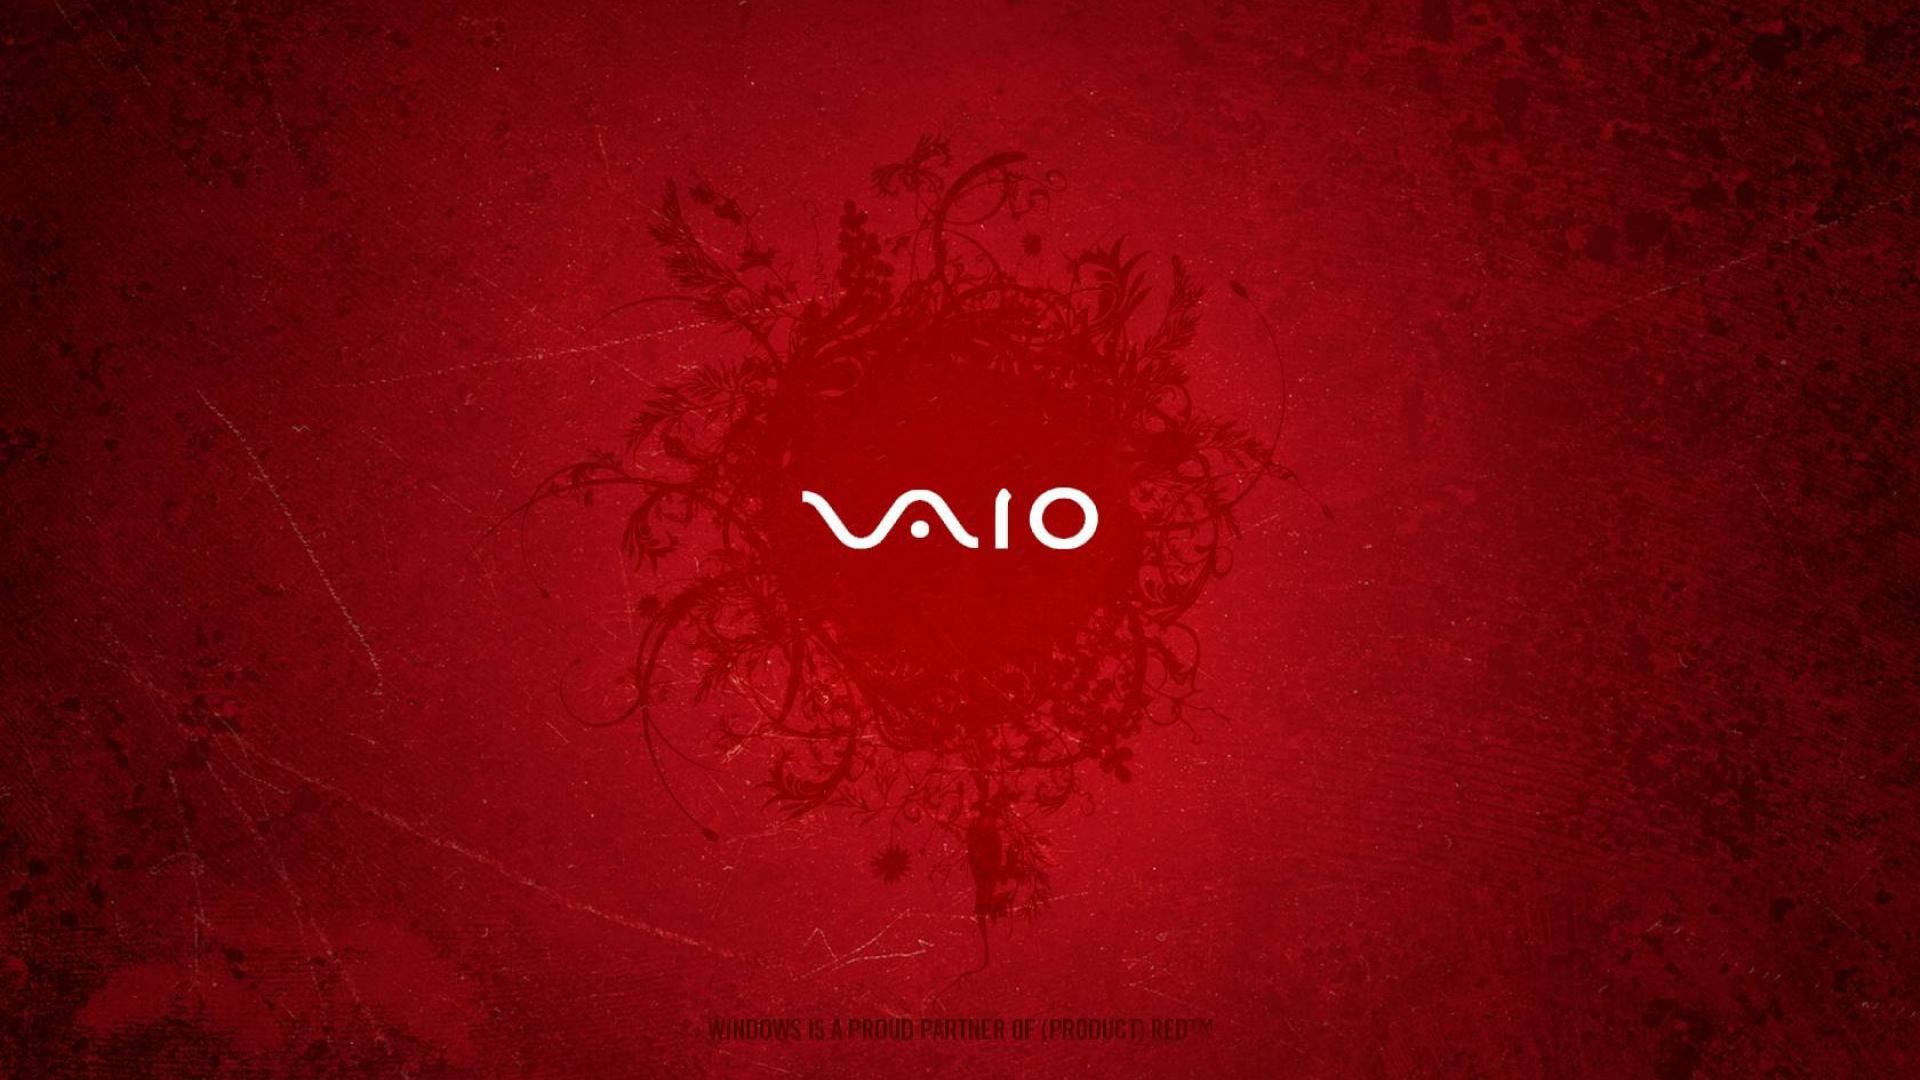 Vaio wallpaper - (#22467) - High Quality and Resolution Wallpapers ...